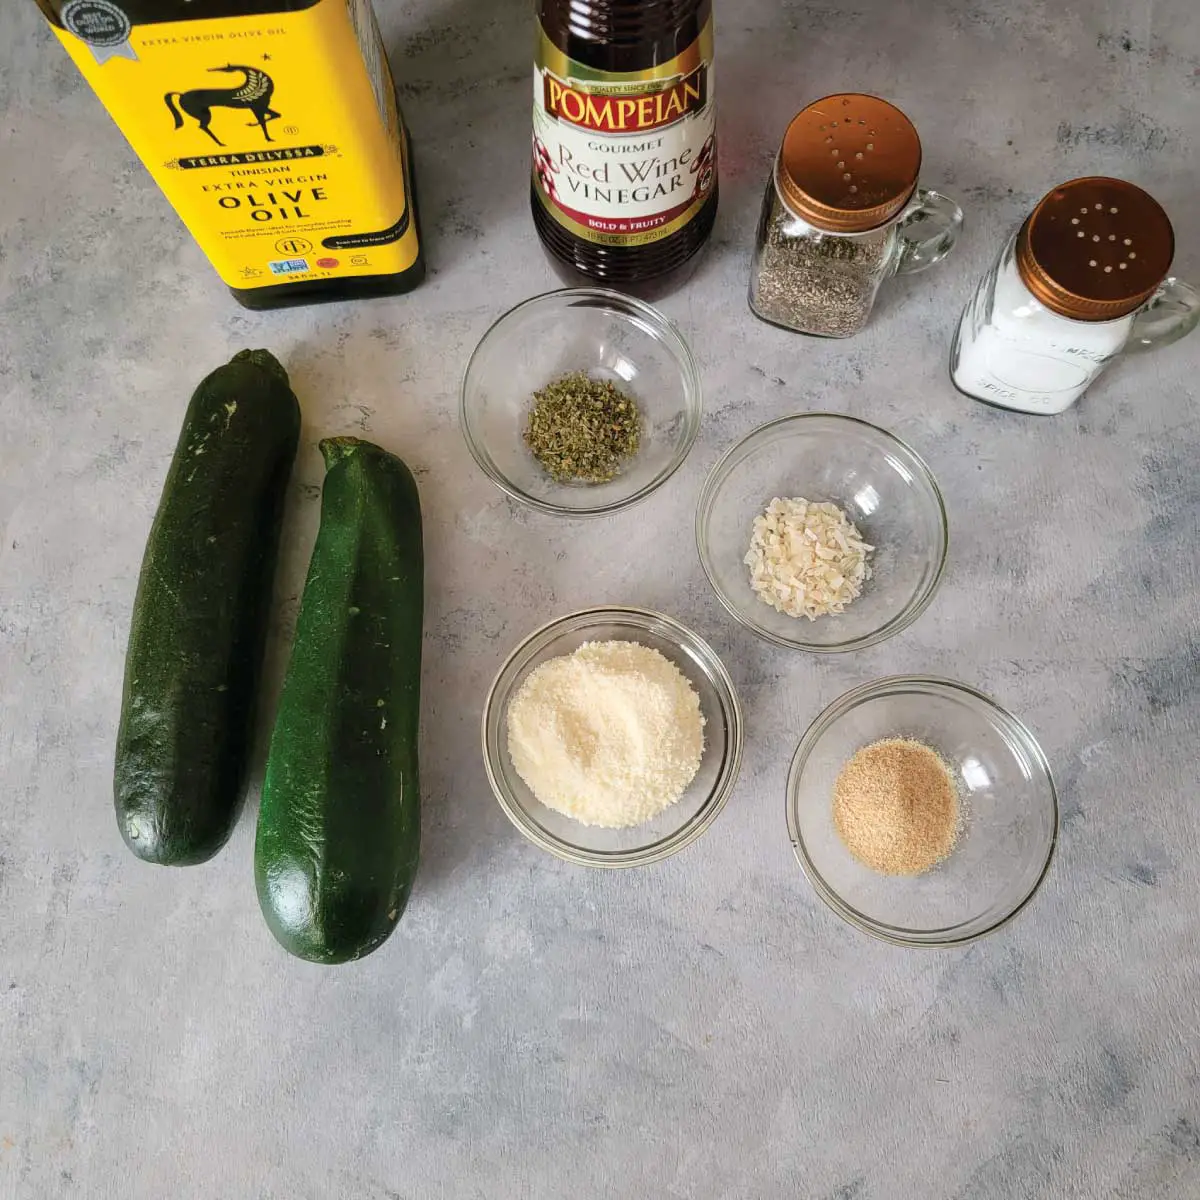 The ingredients out and prepped.